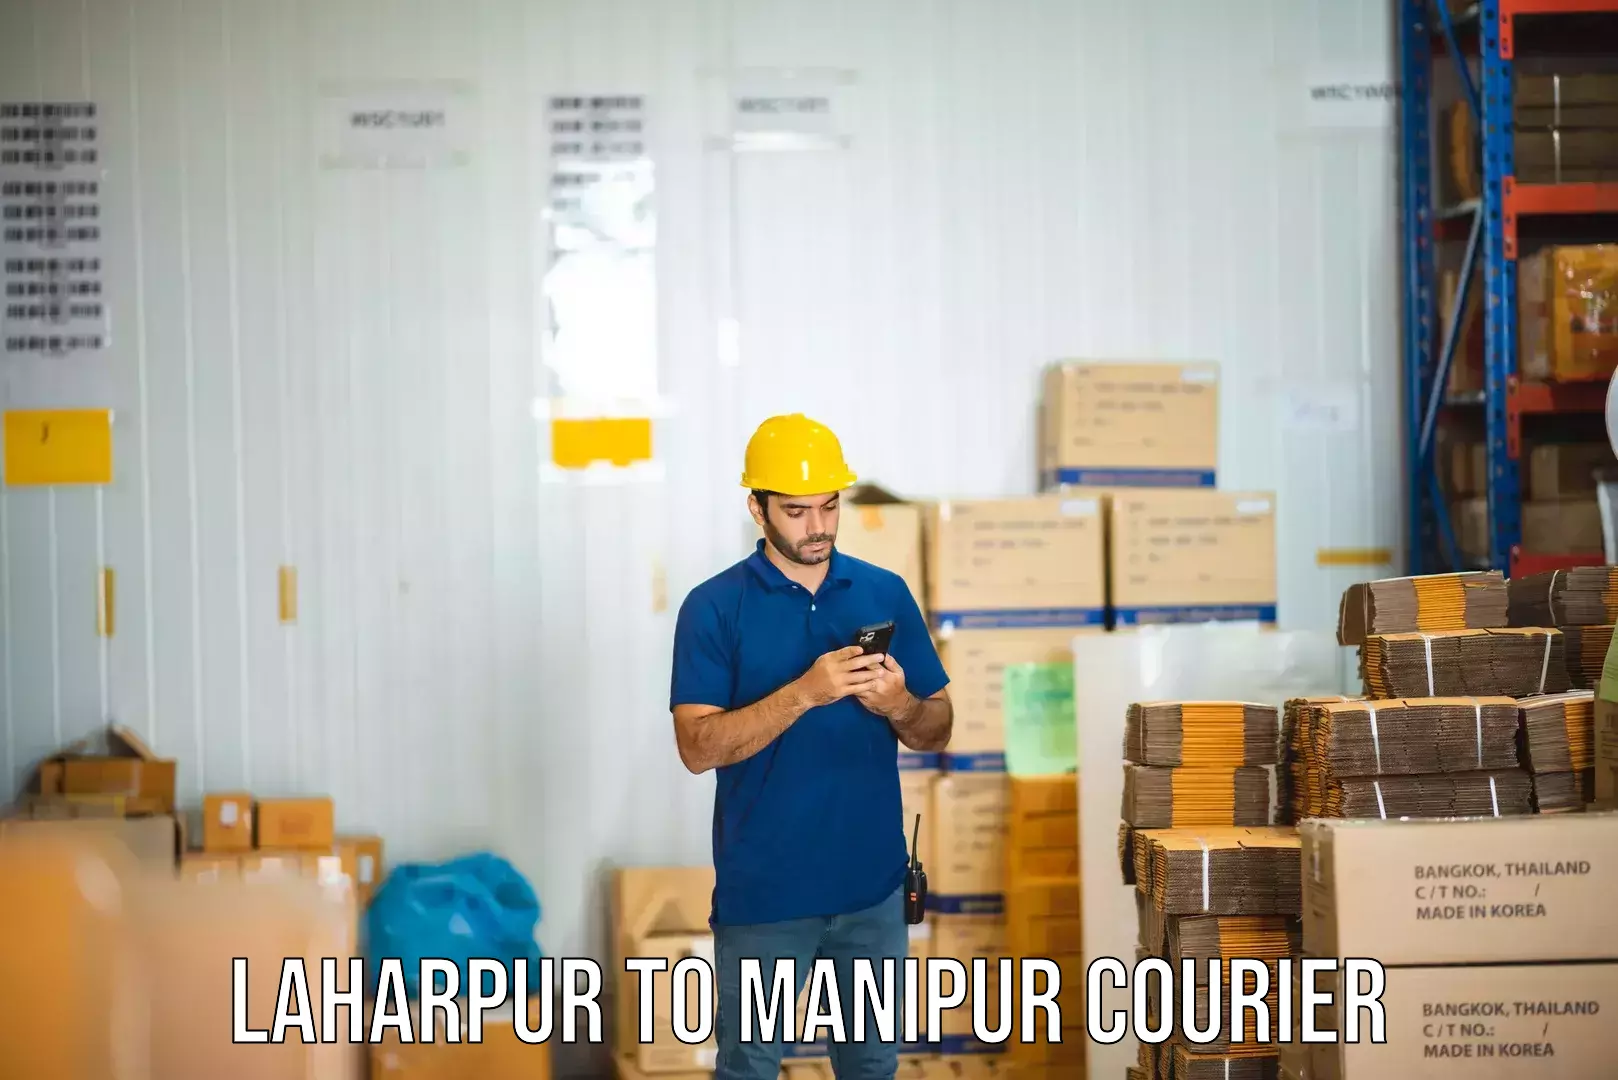 Nationwide delivery network Laharpur to Manipur